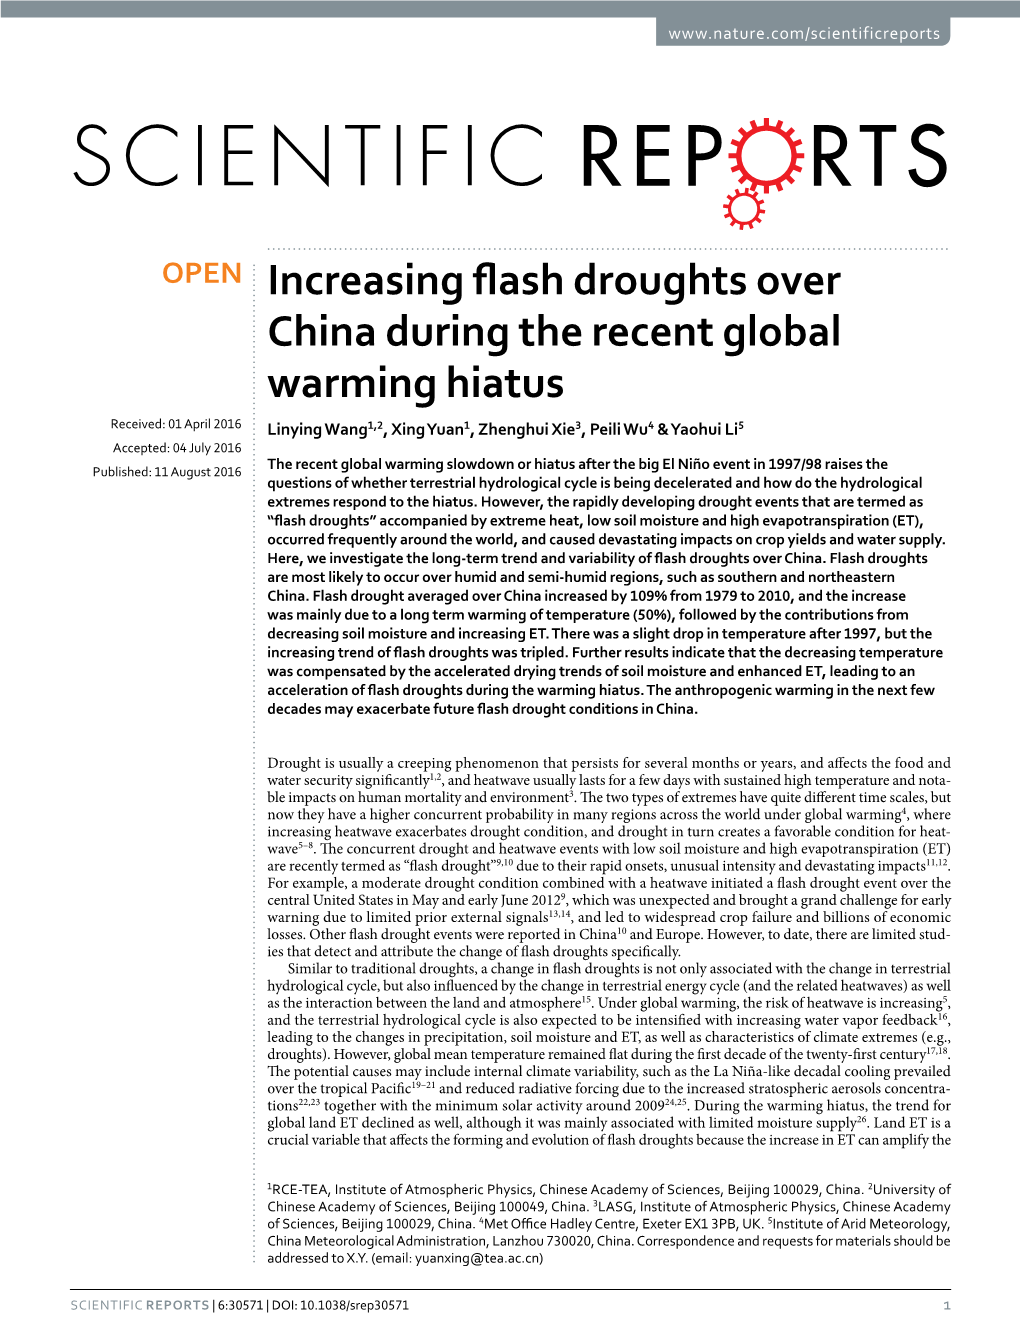 Increasing Flash Droughts Over China During the Recent Global Warming